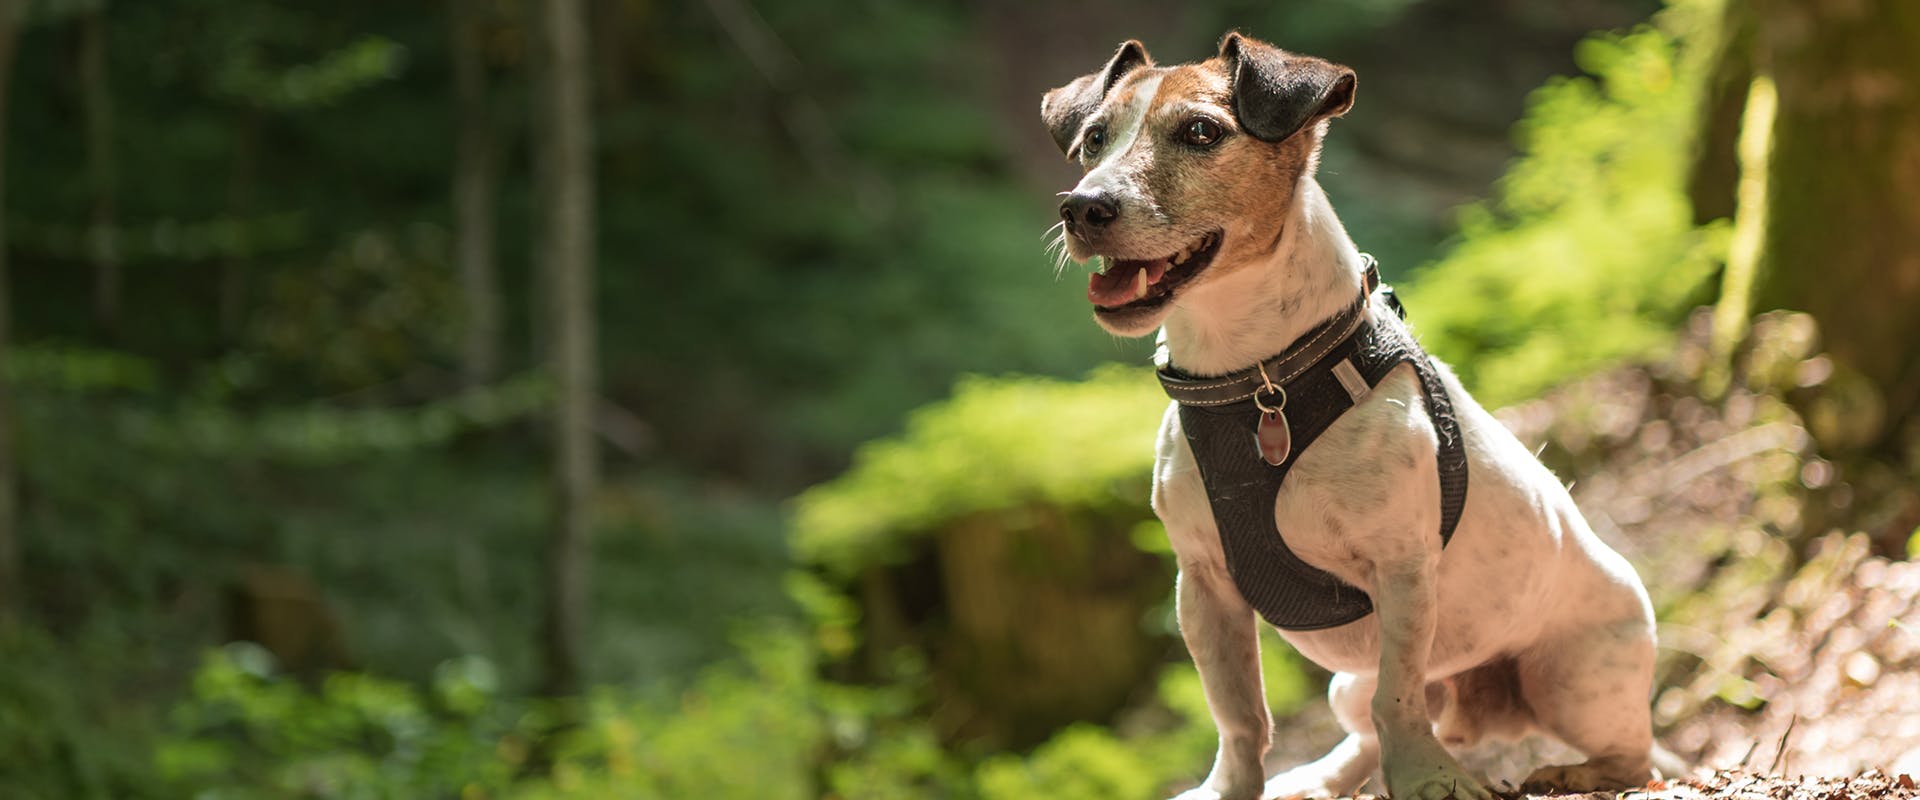 A Jack Russell standing in the middle of a forest, wearing a black small dog harness